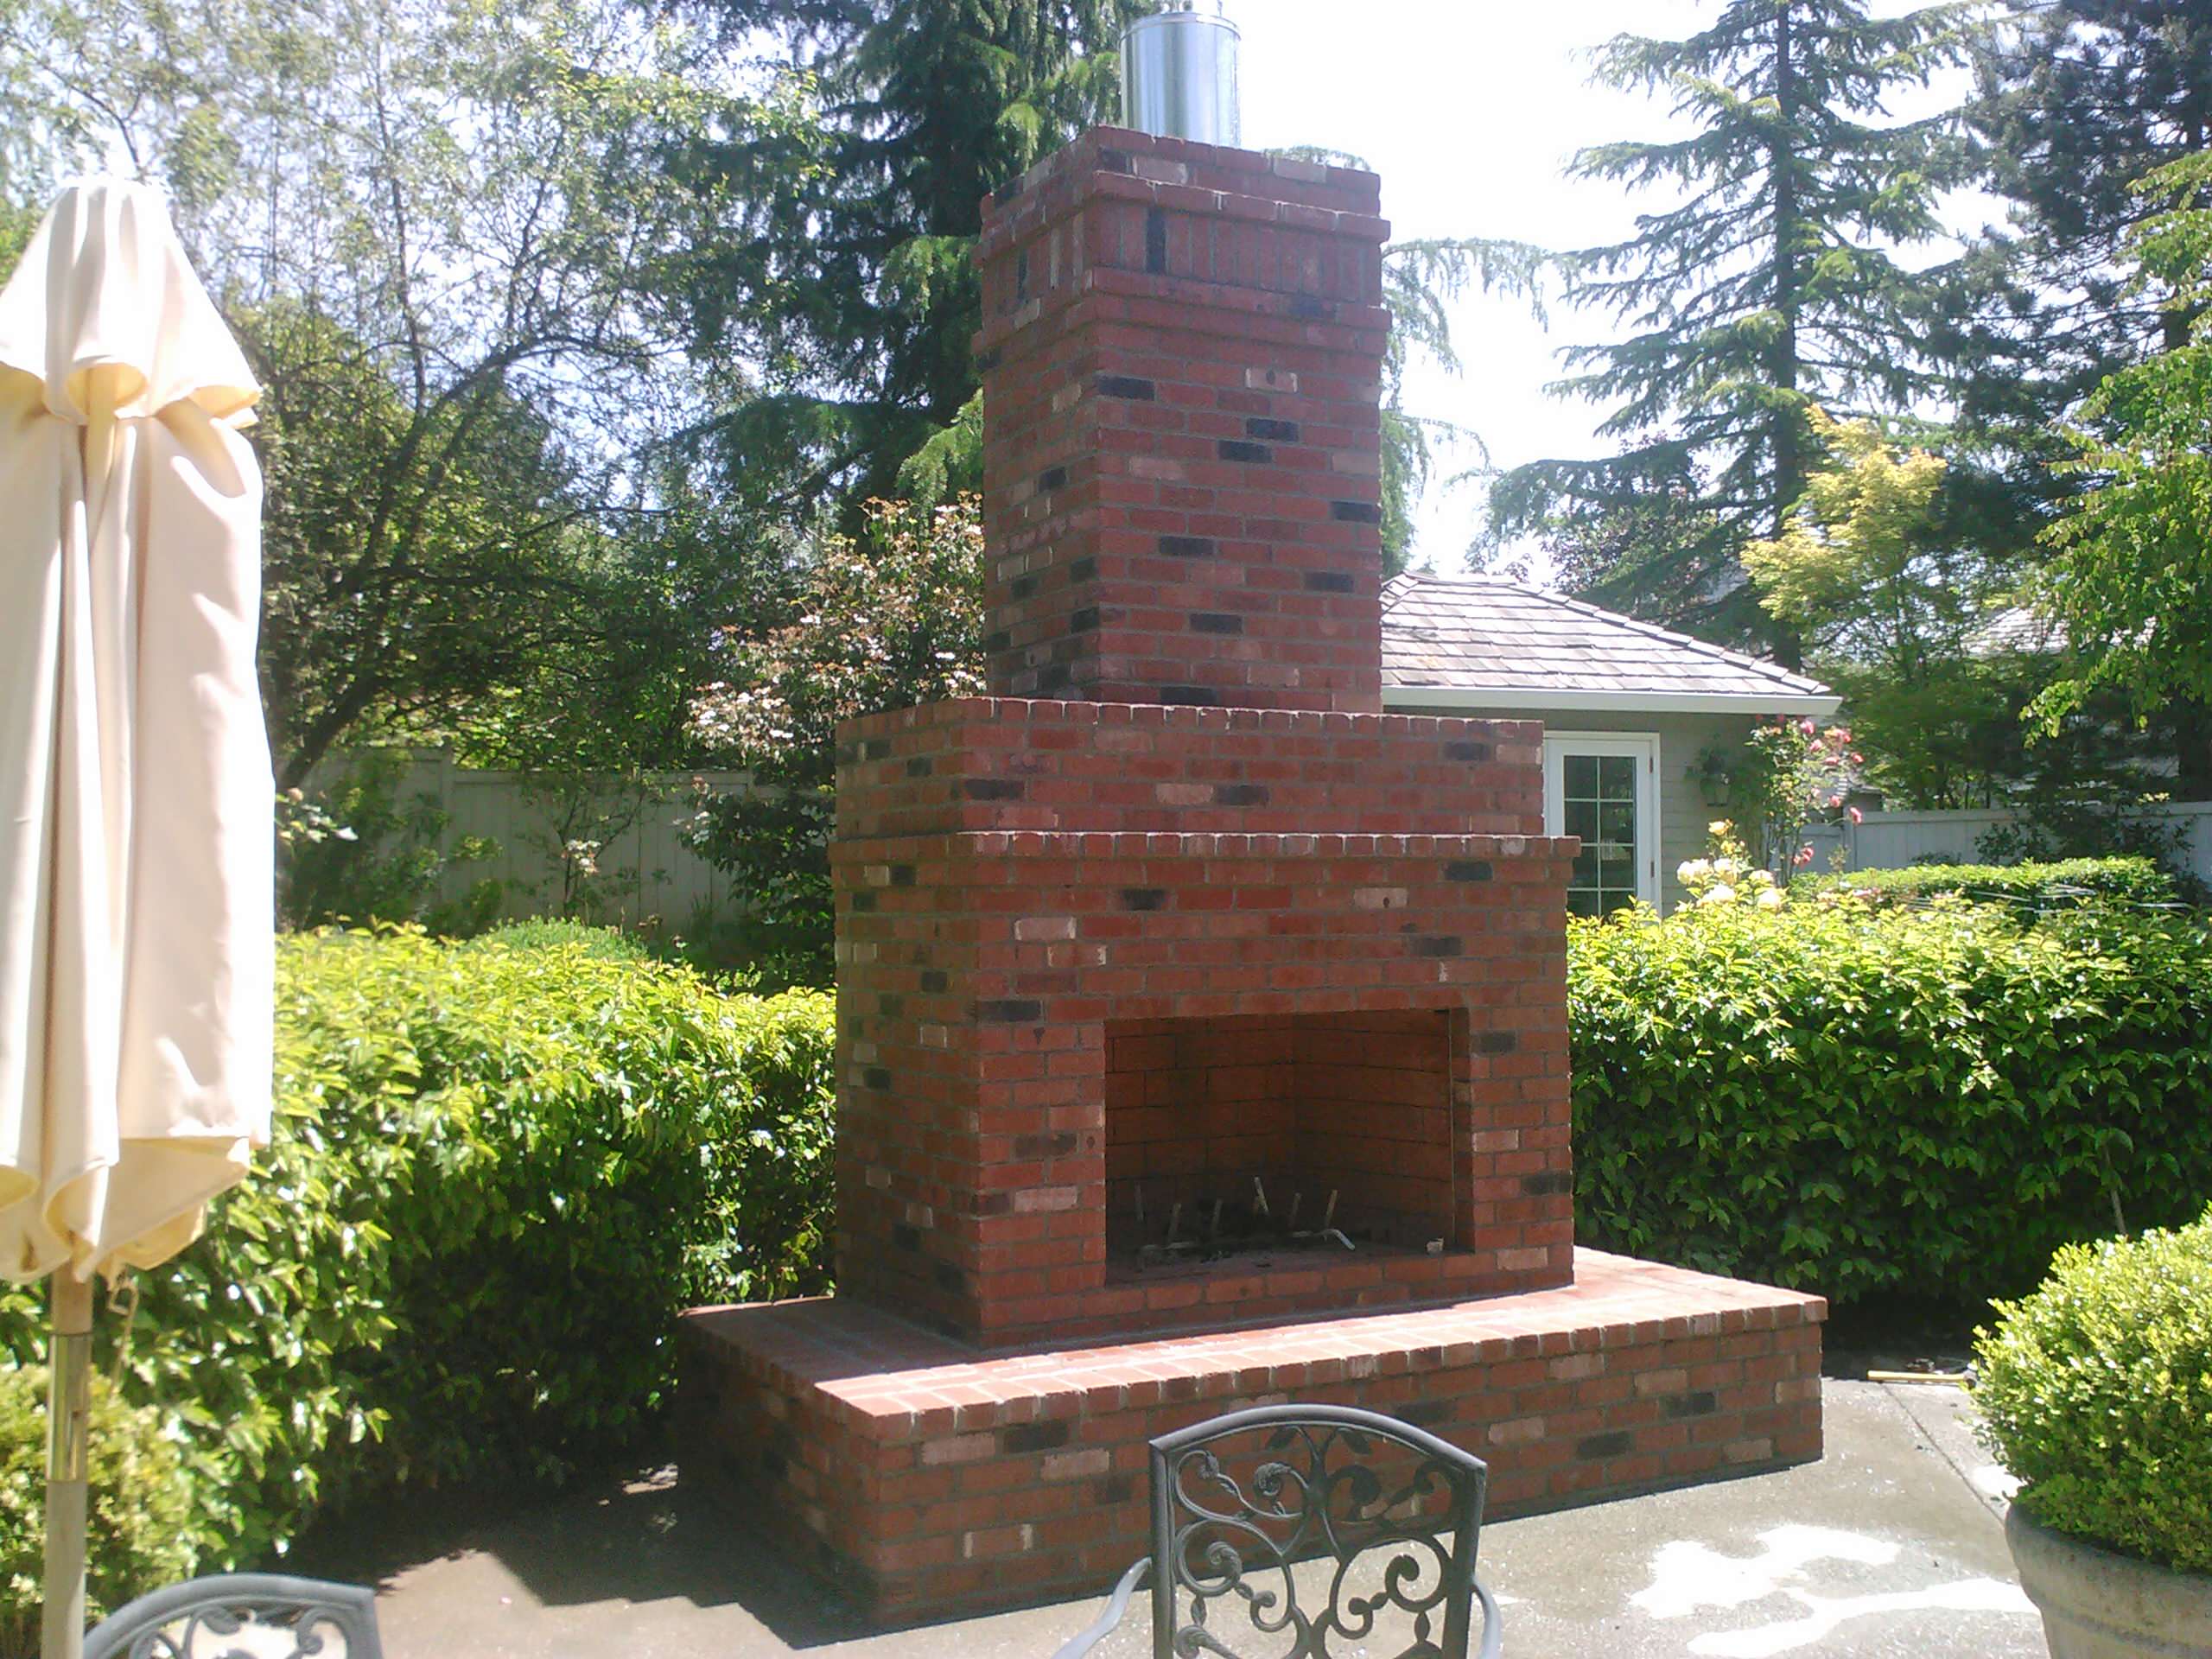 Outdoor Brick Fireplace Houzz, What Kind Of Brick To Use For Outdoor Fireplace